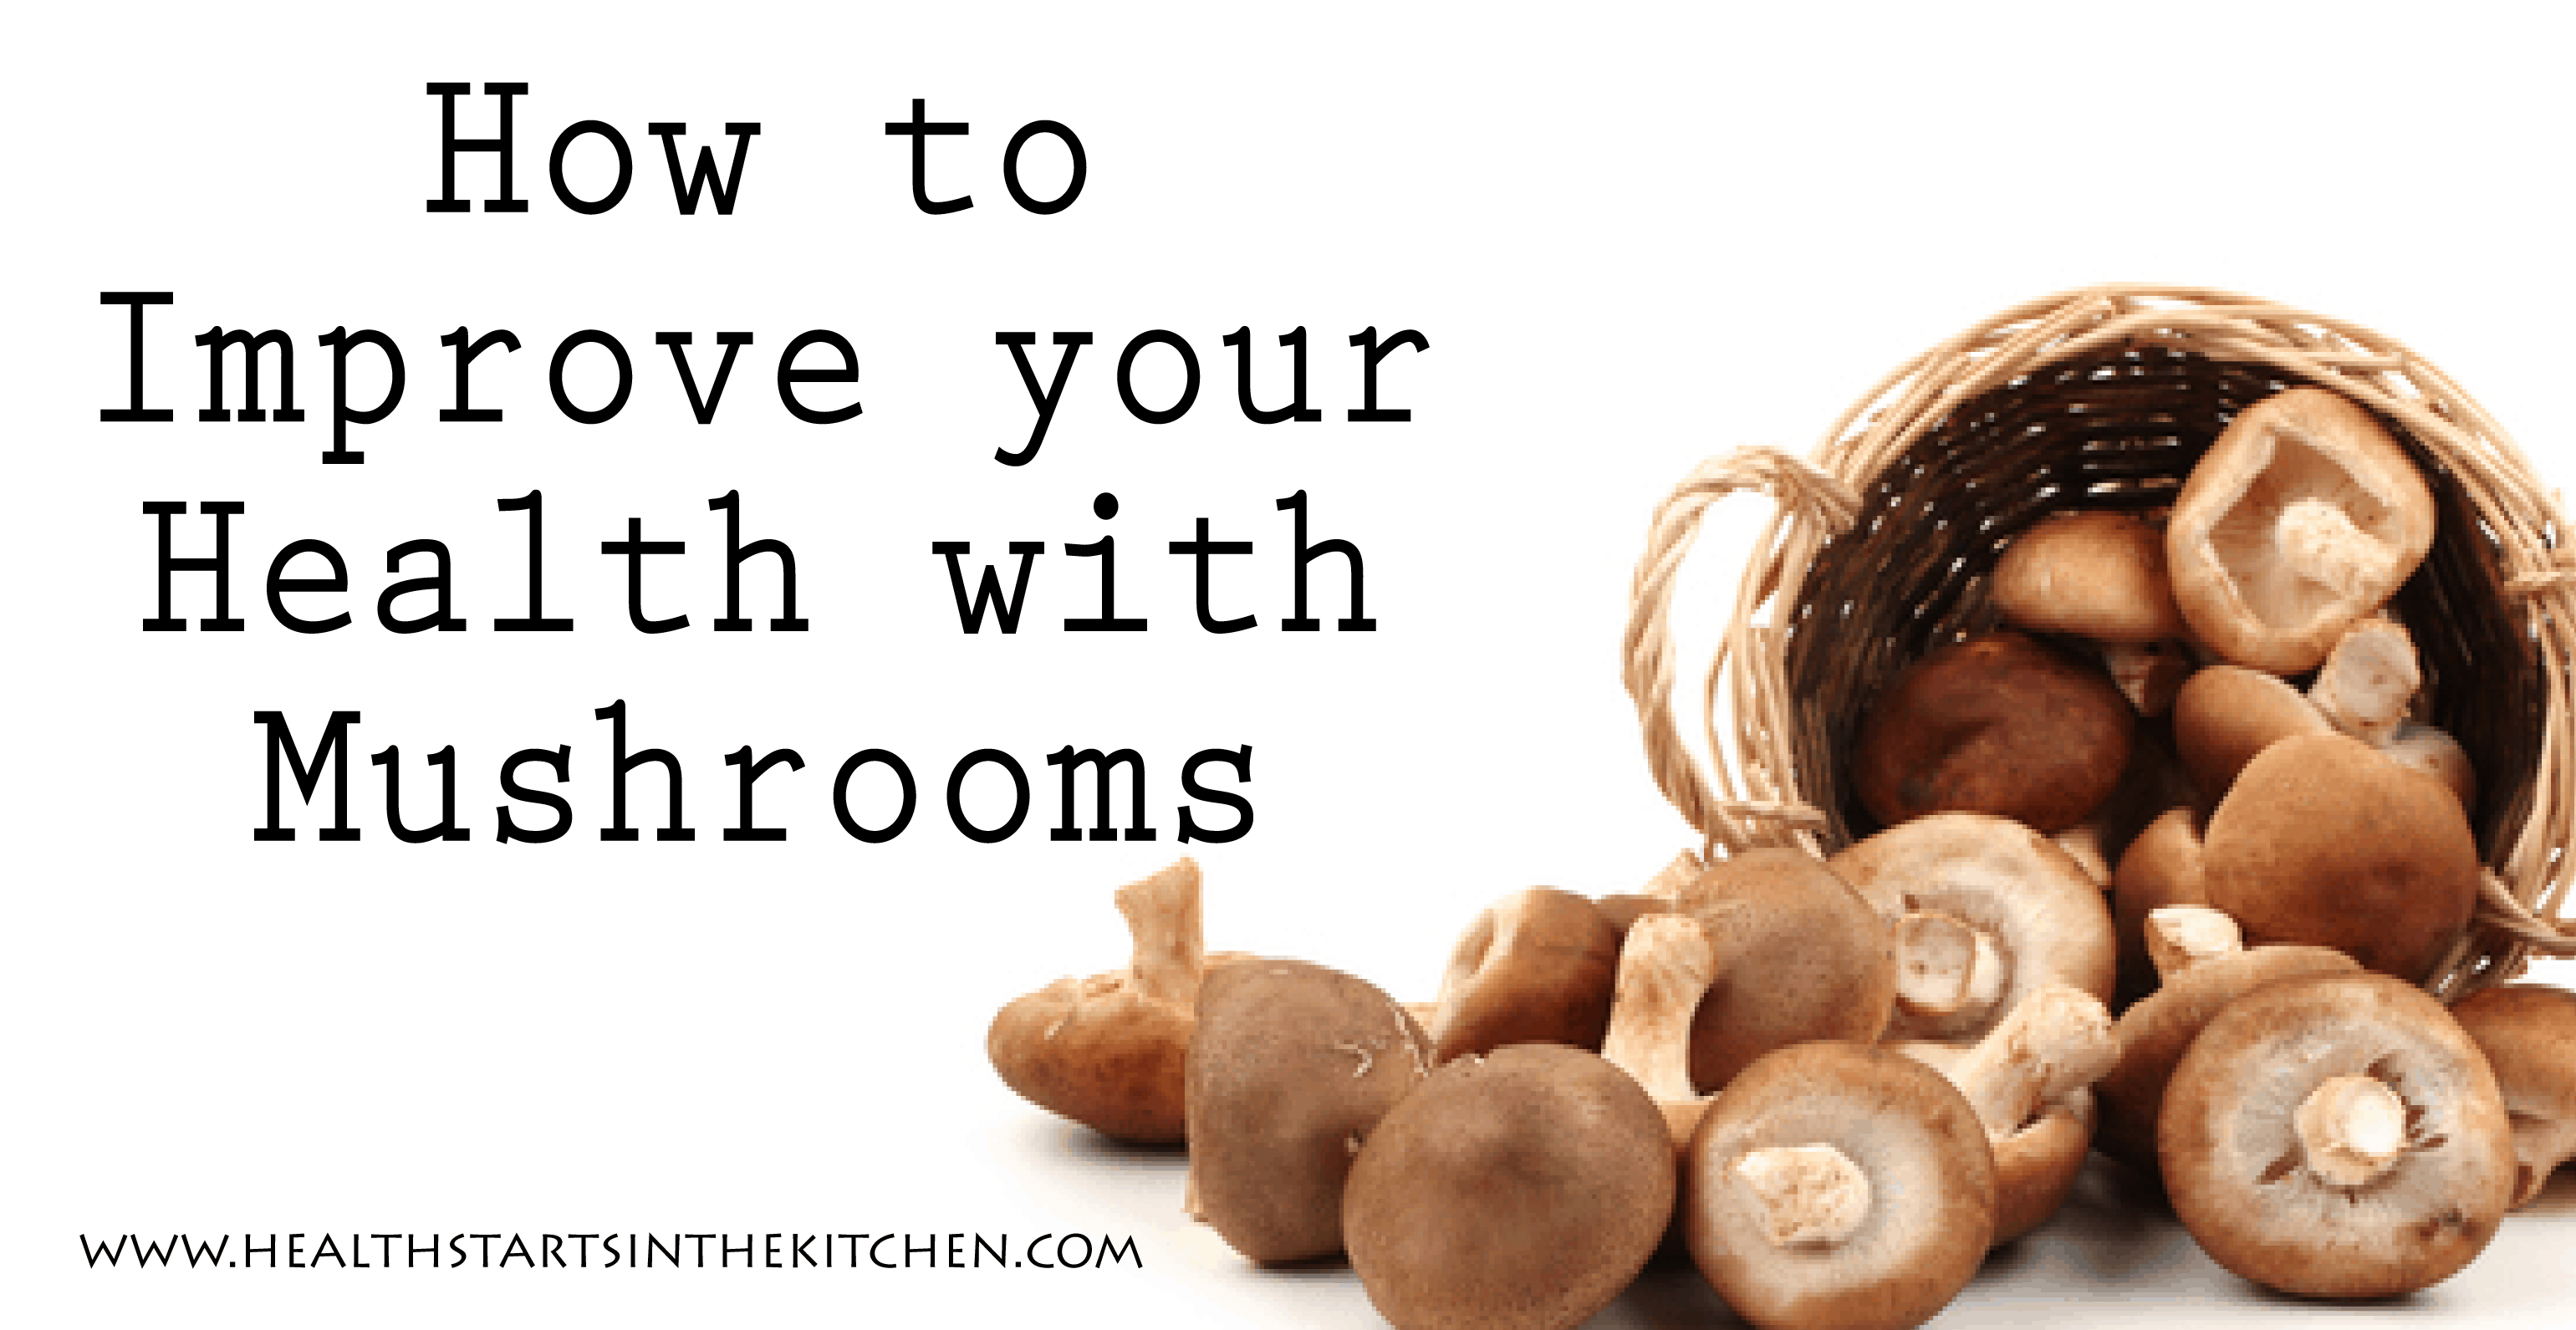 How to improve your health with mushrooms